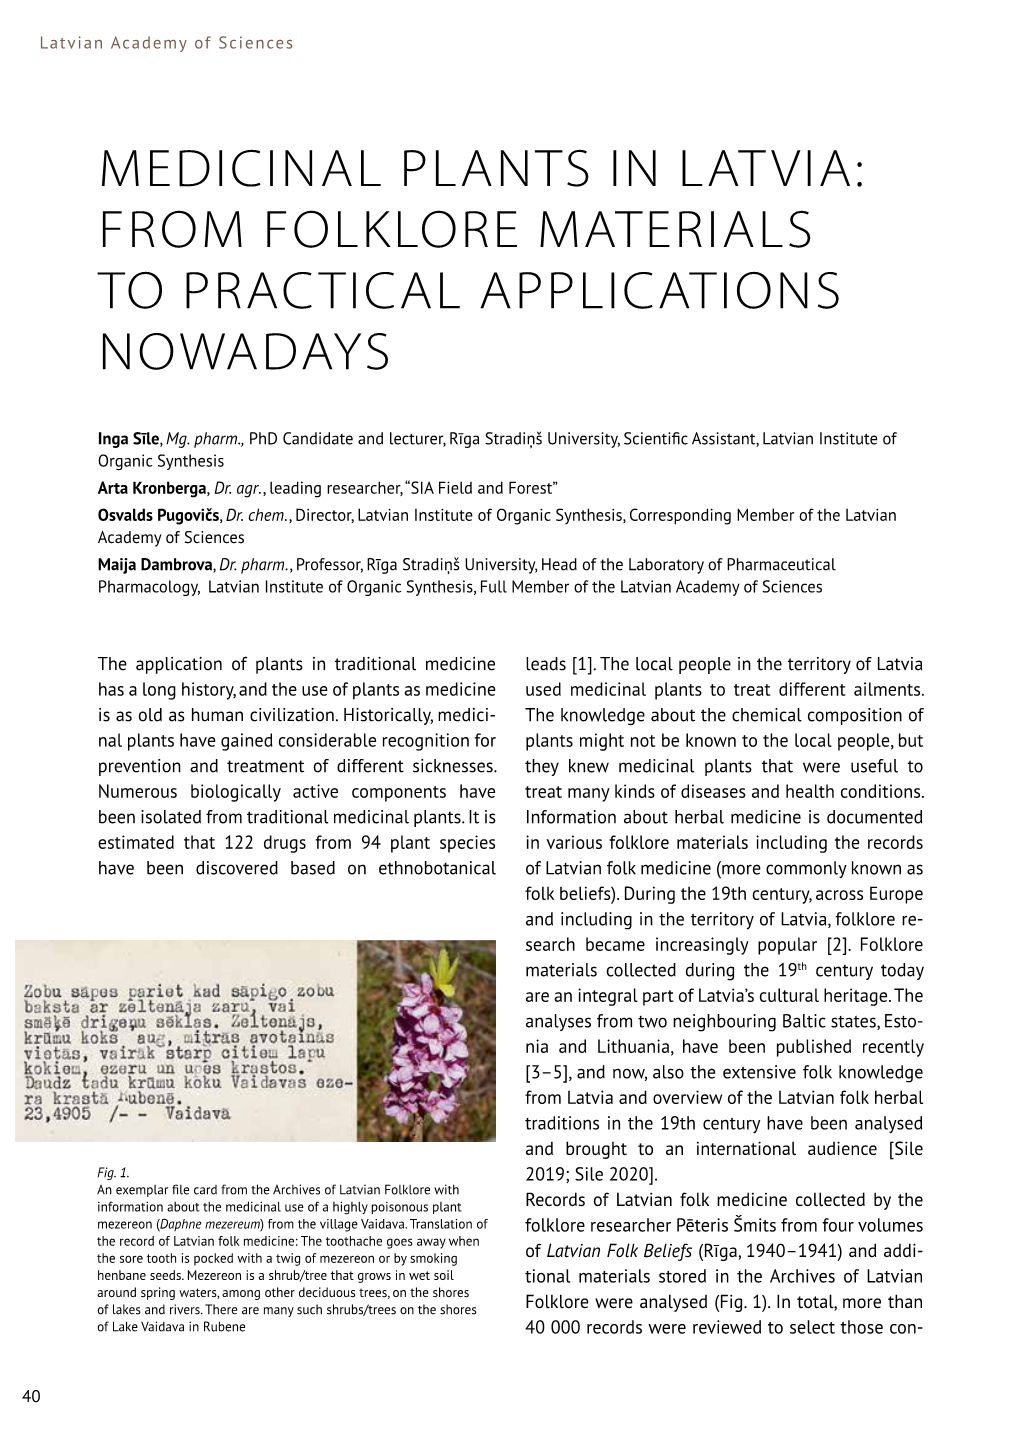 Medicinal Plants in Latvia: from Folklore Materials to Practical Applications Nowadays